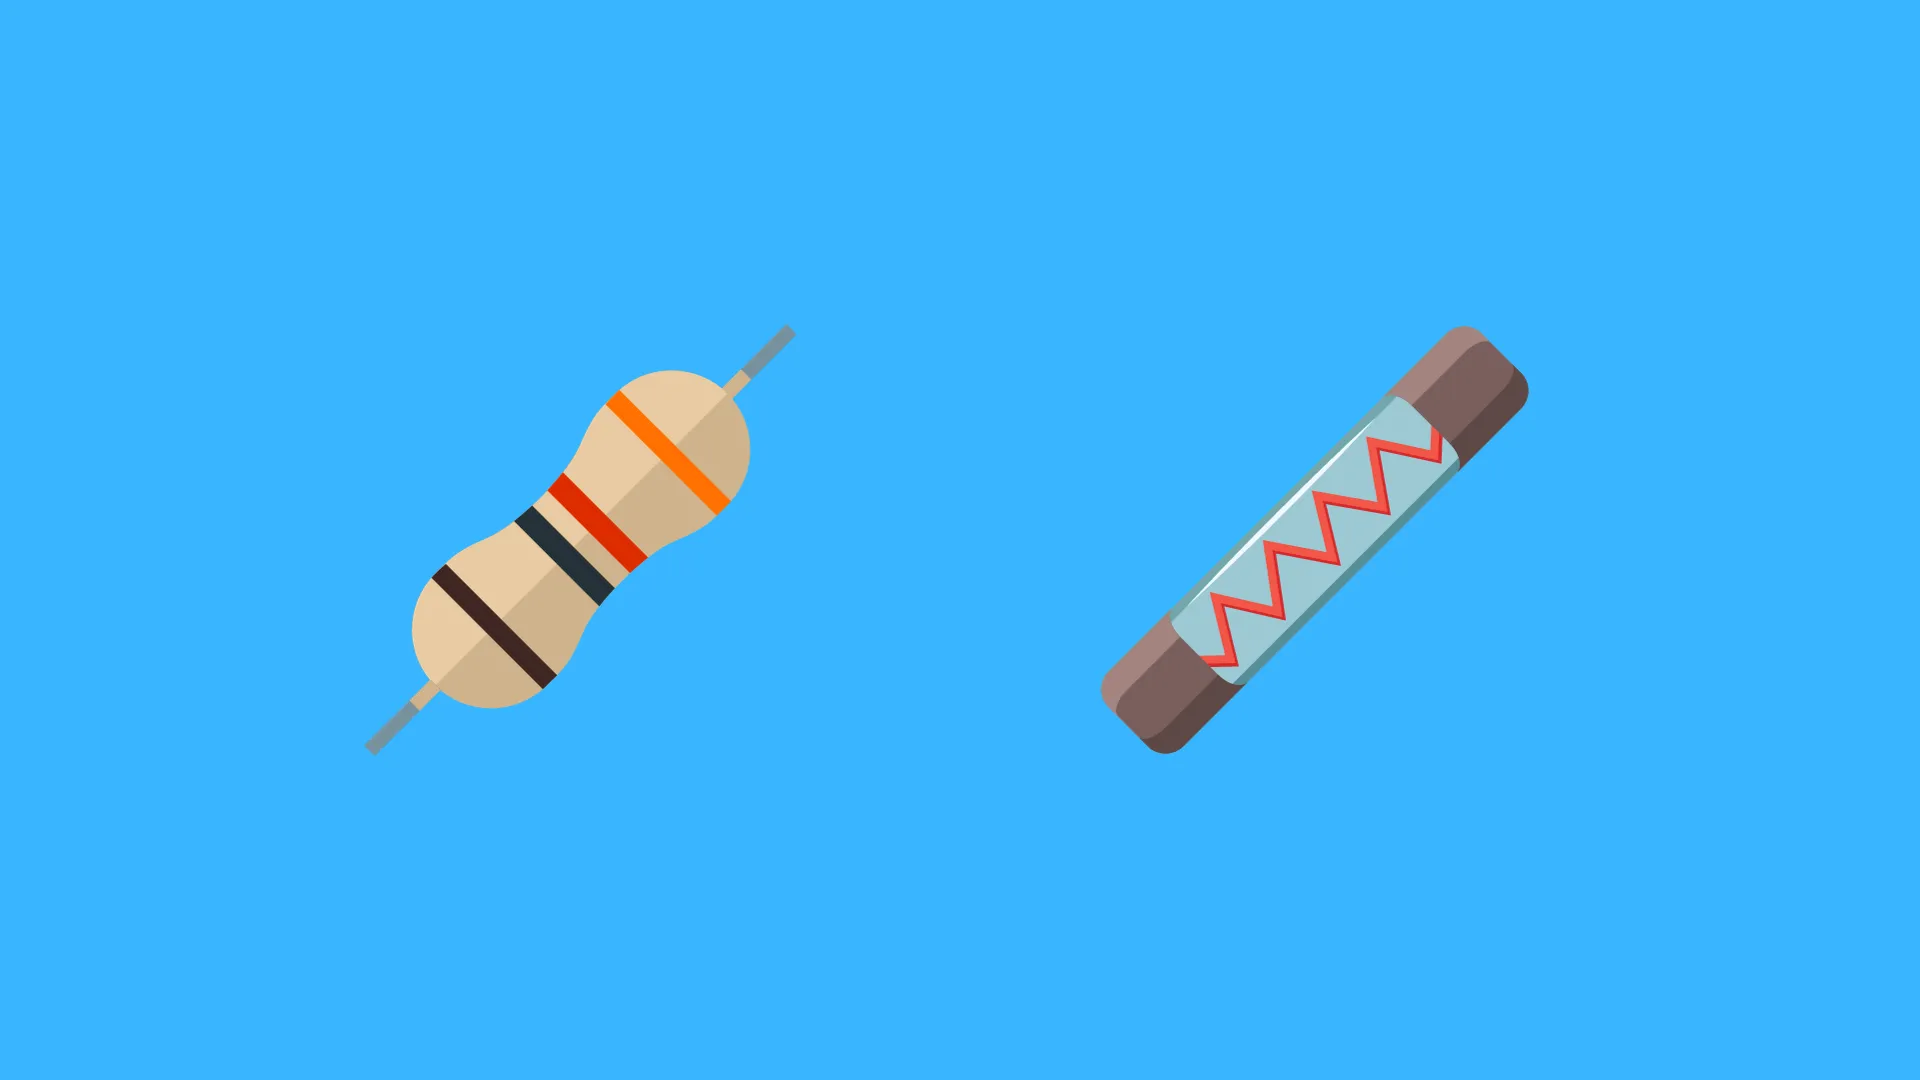 Resistor vs Fuse: What’s the Difference?